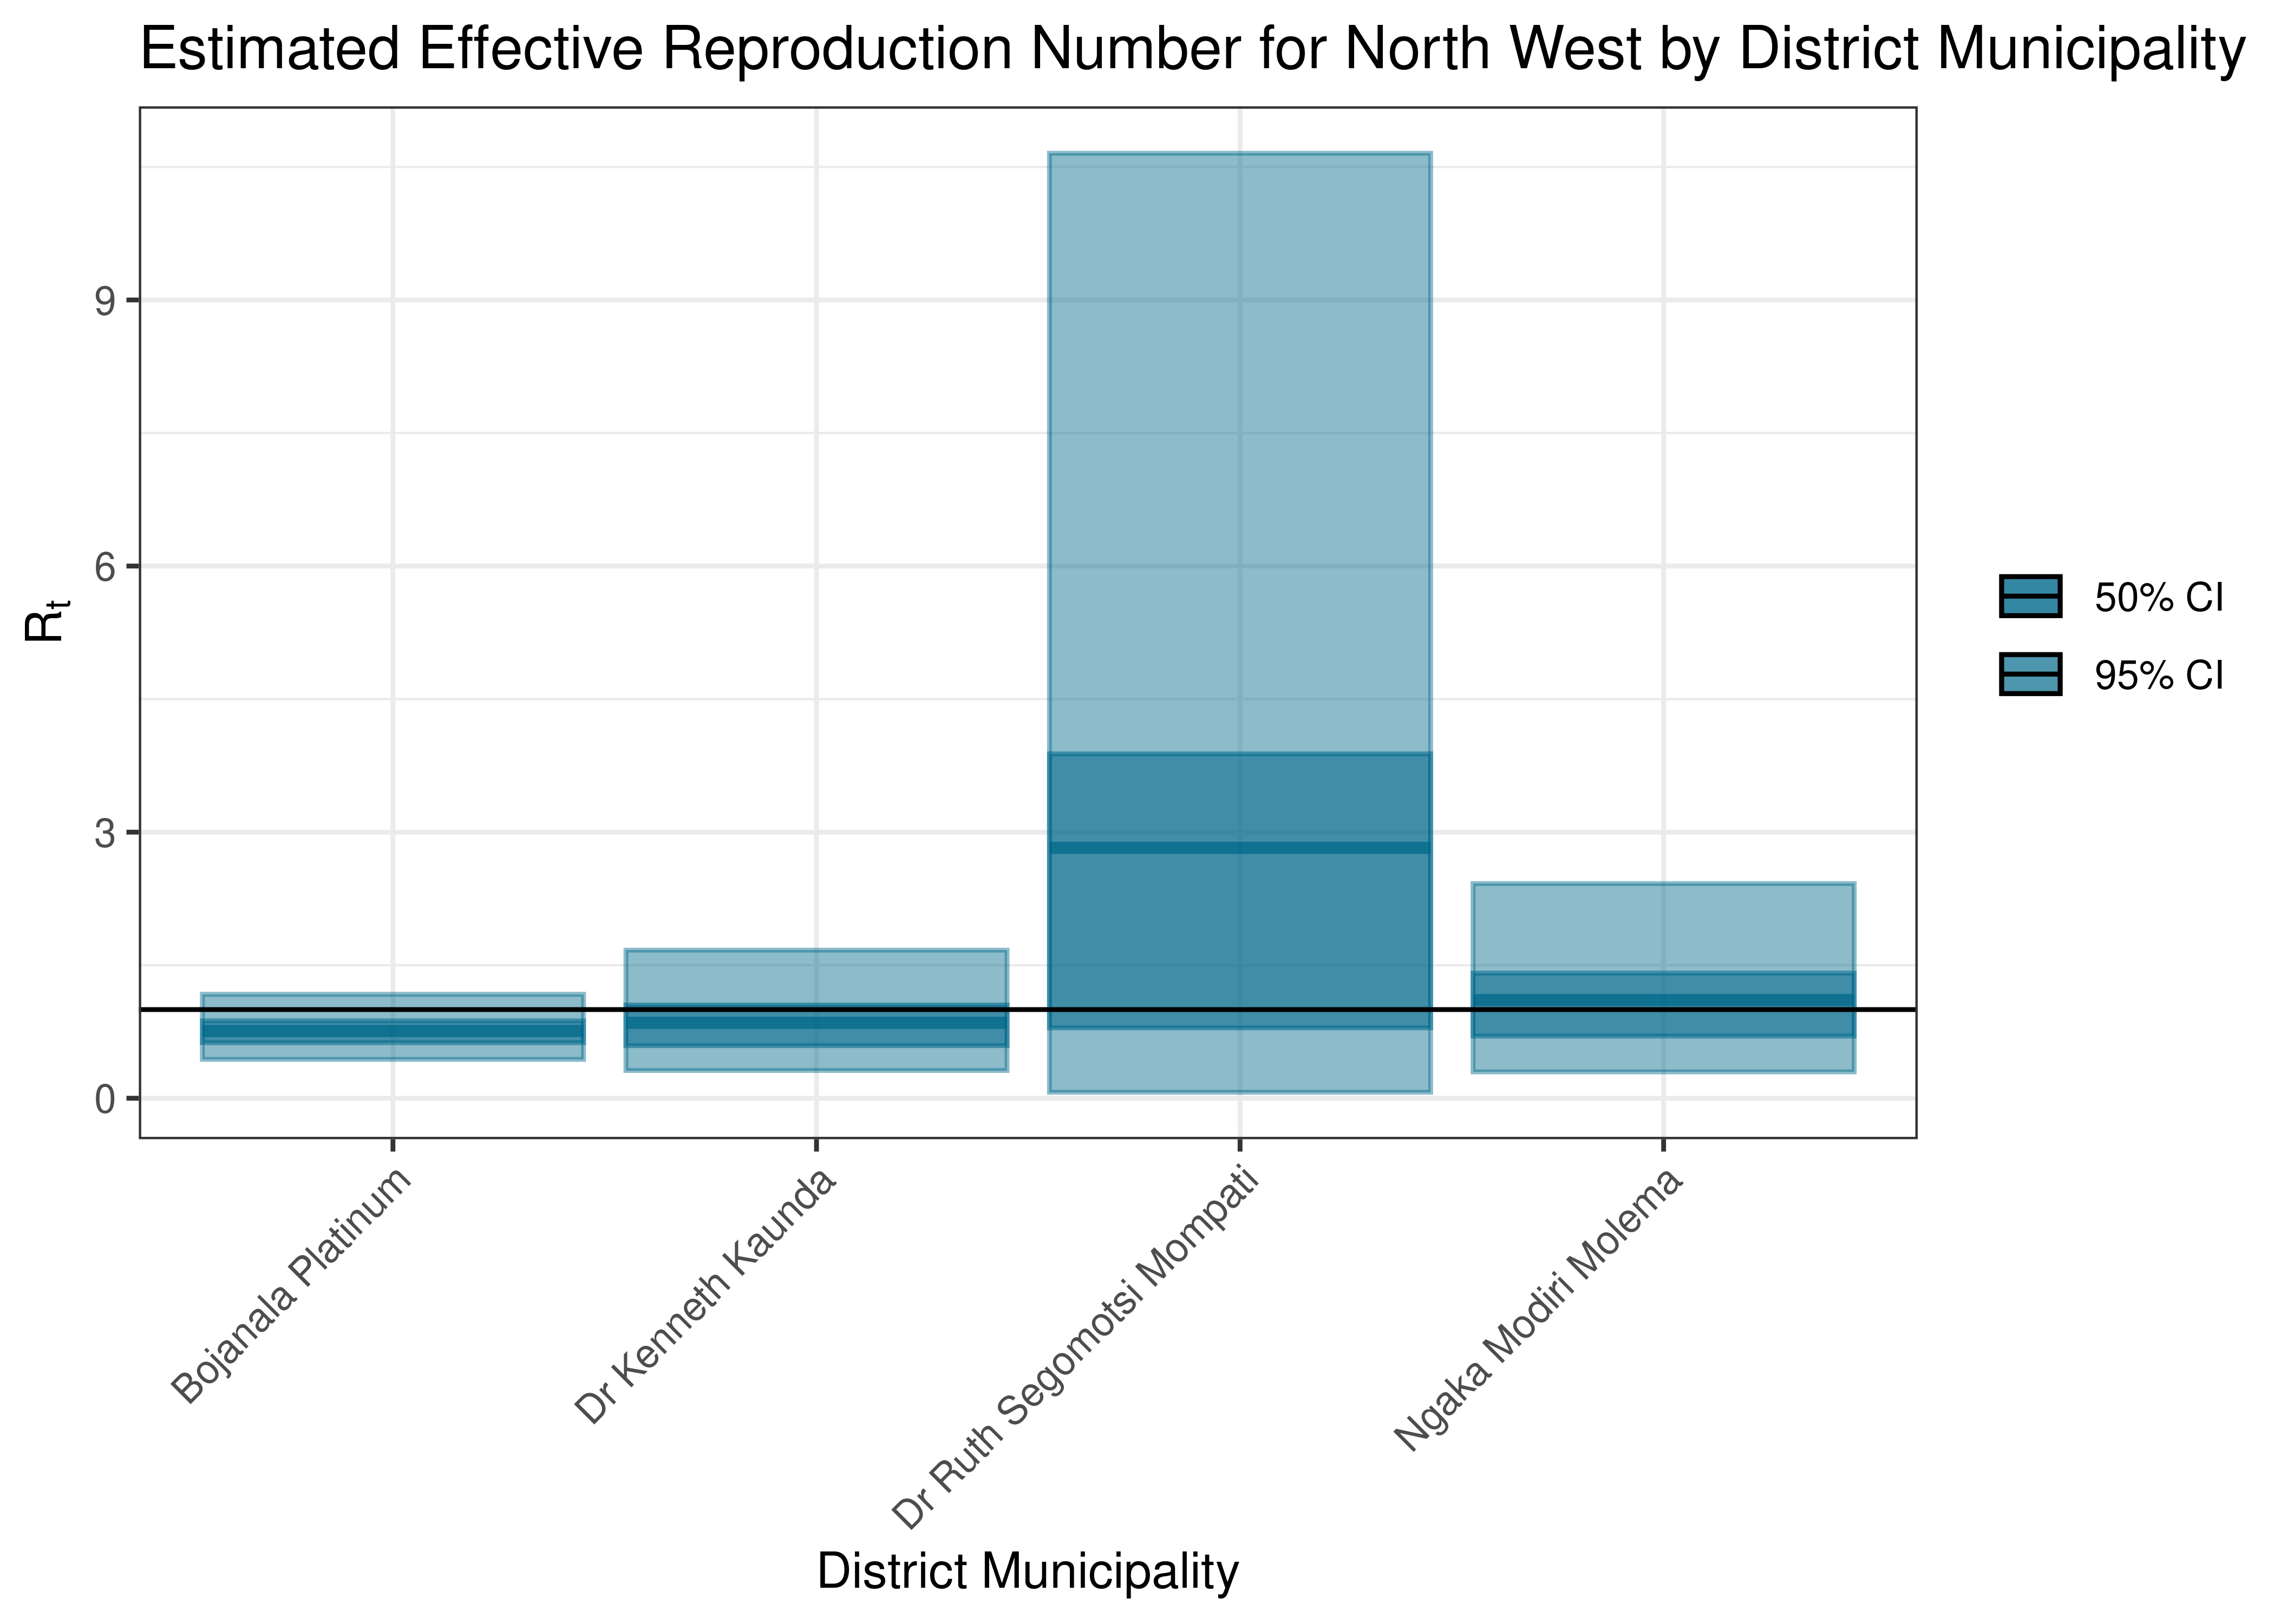 Estimated Effective Reproduction Number for North West by District Municipality